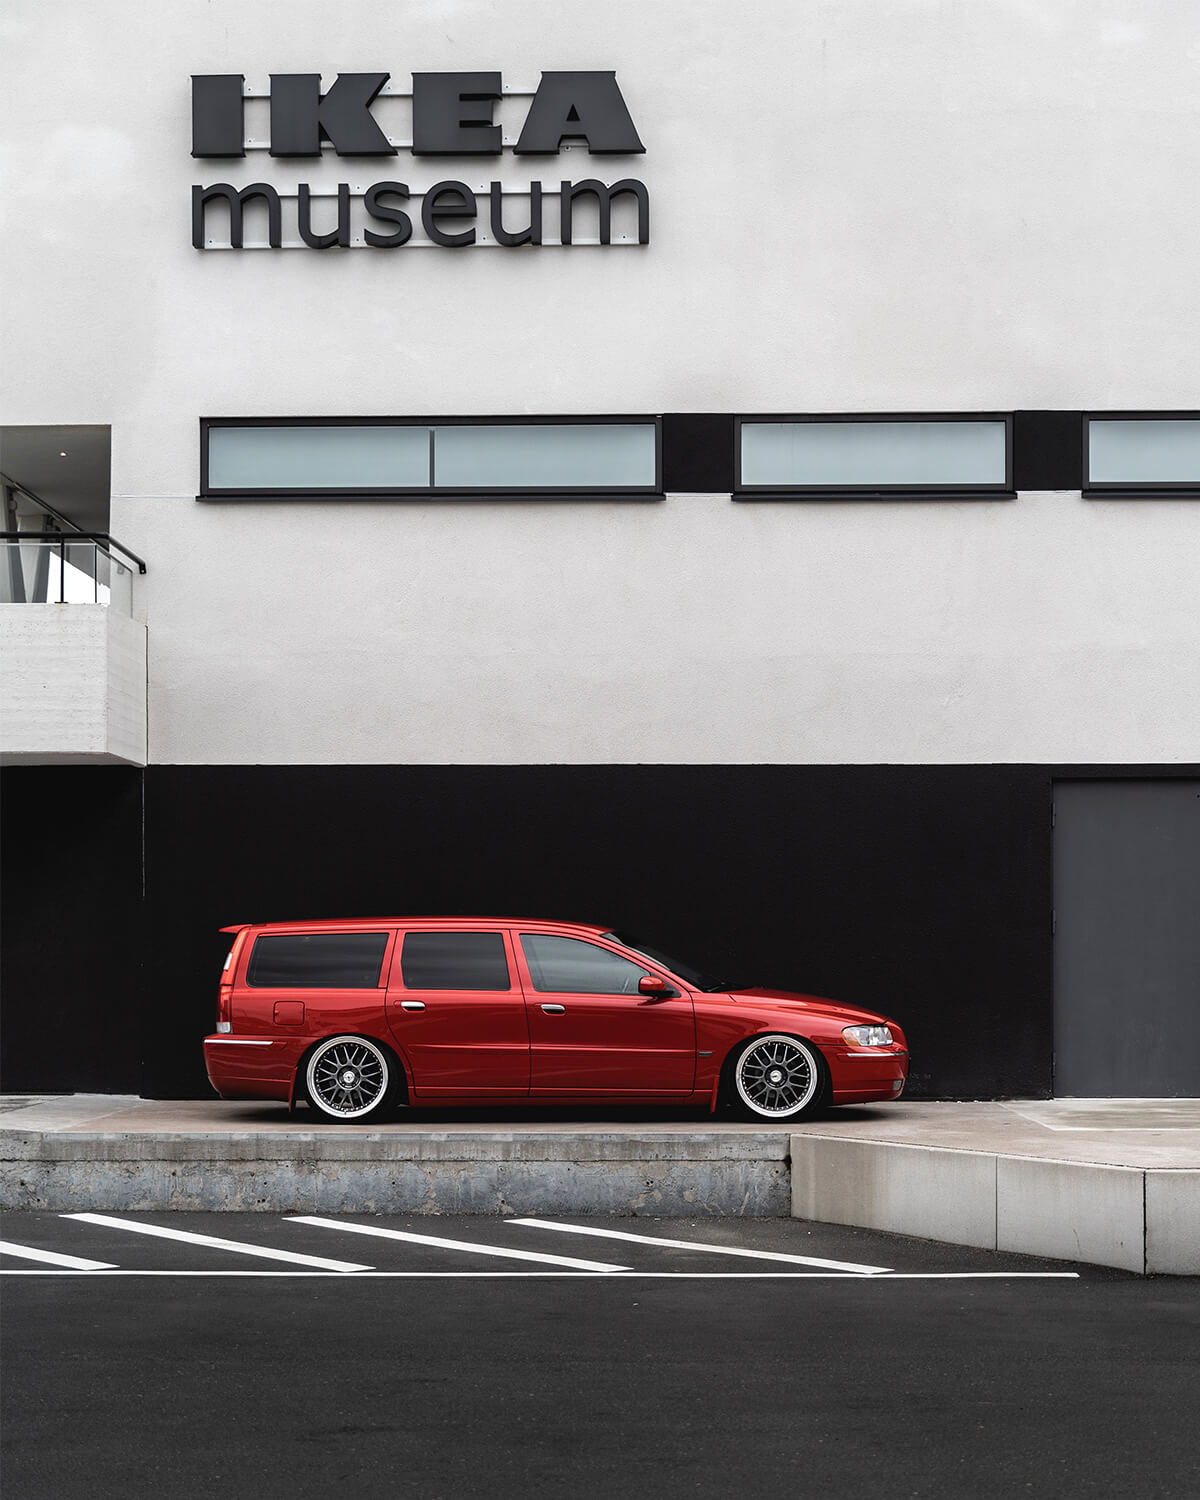 Stanced Volvo V70 Station wagon in red color by IKEA